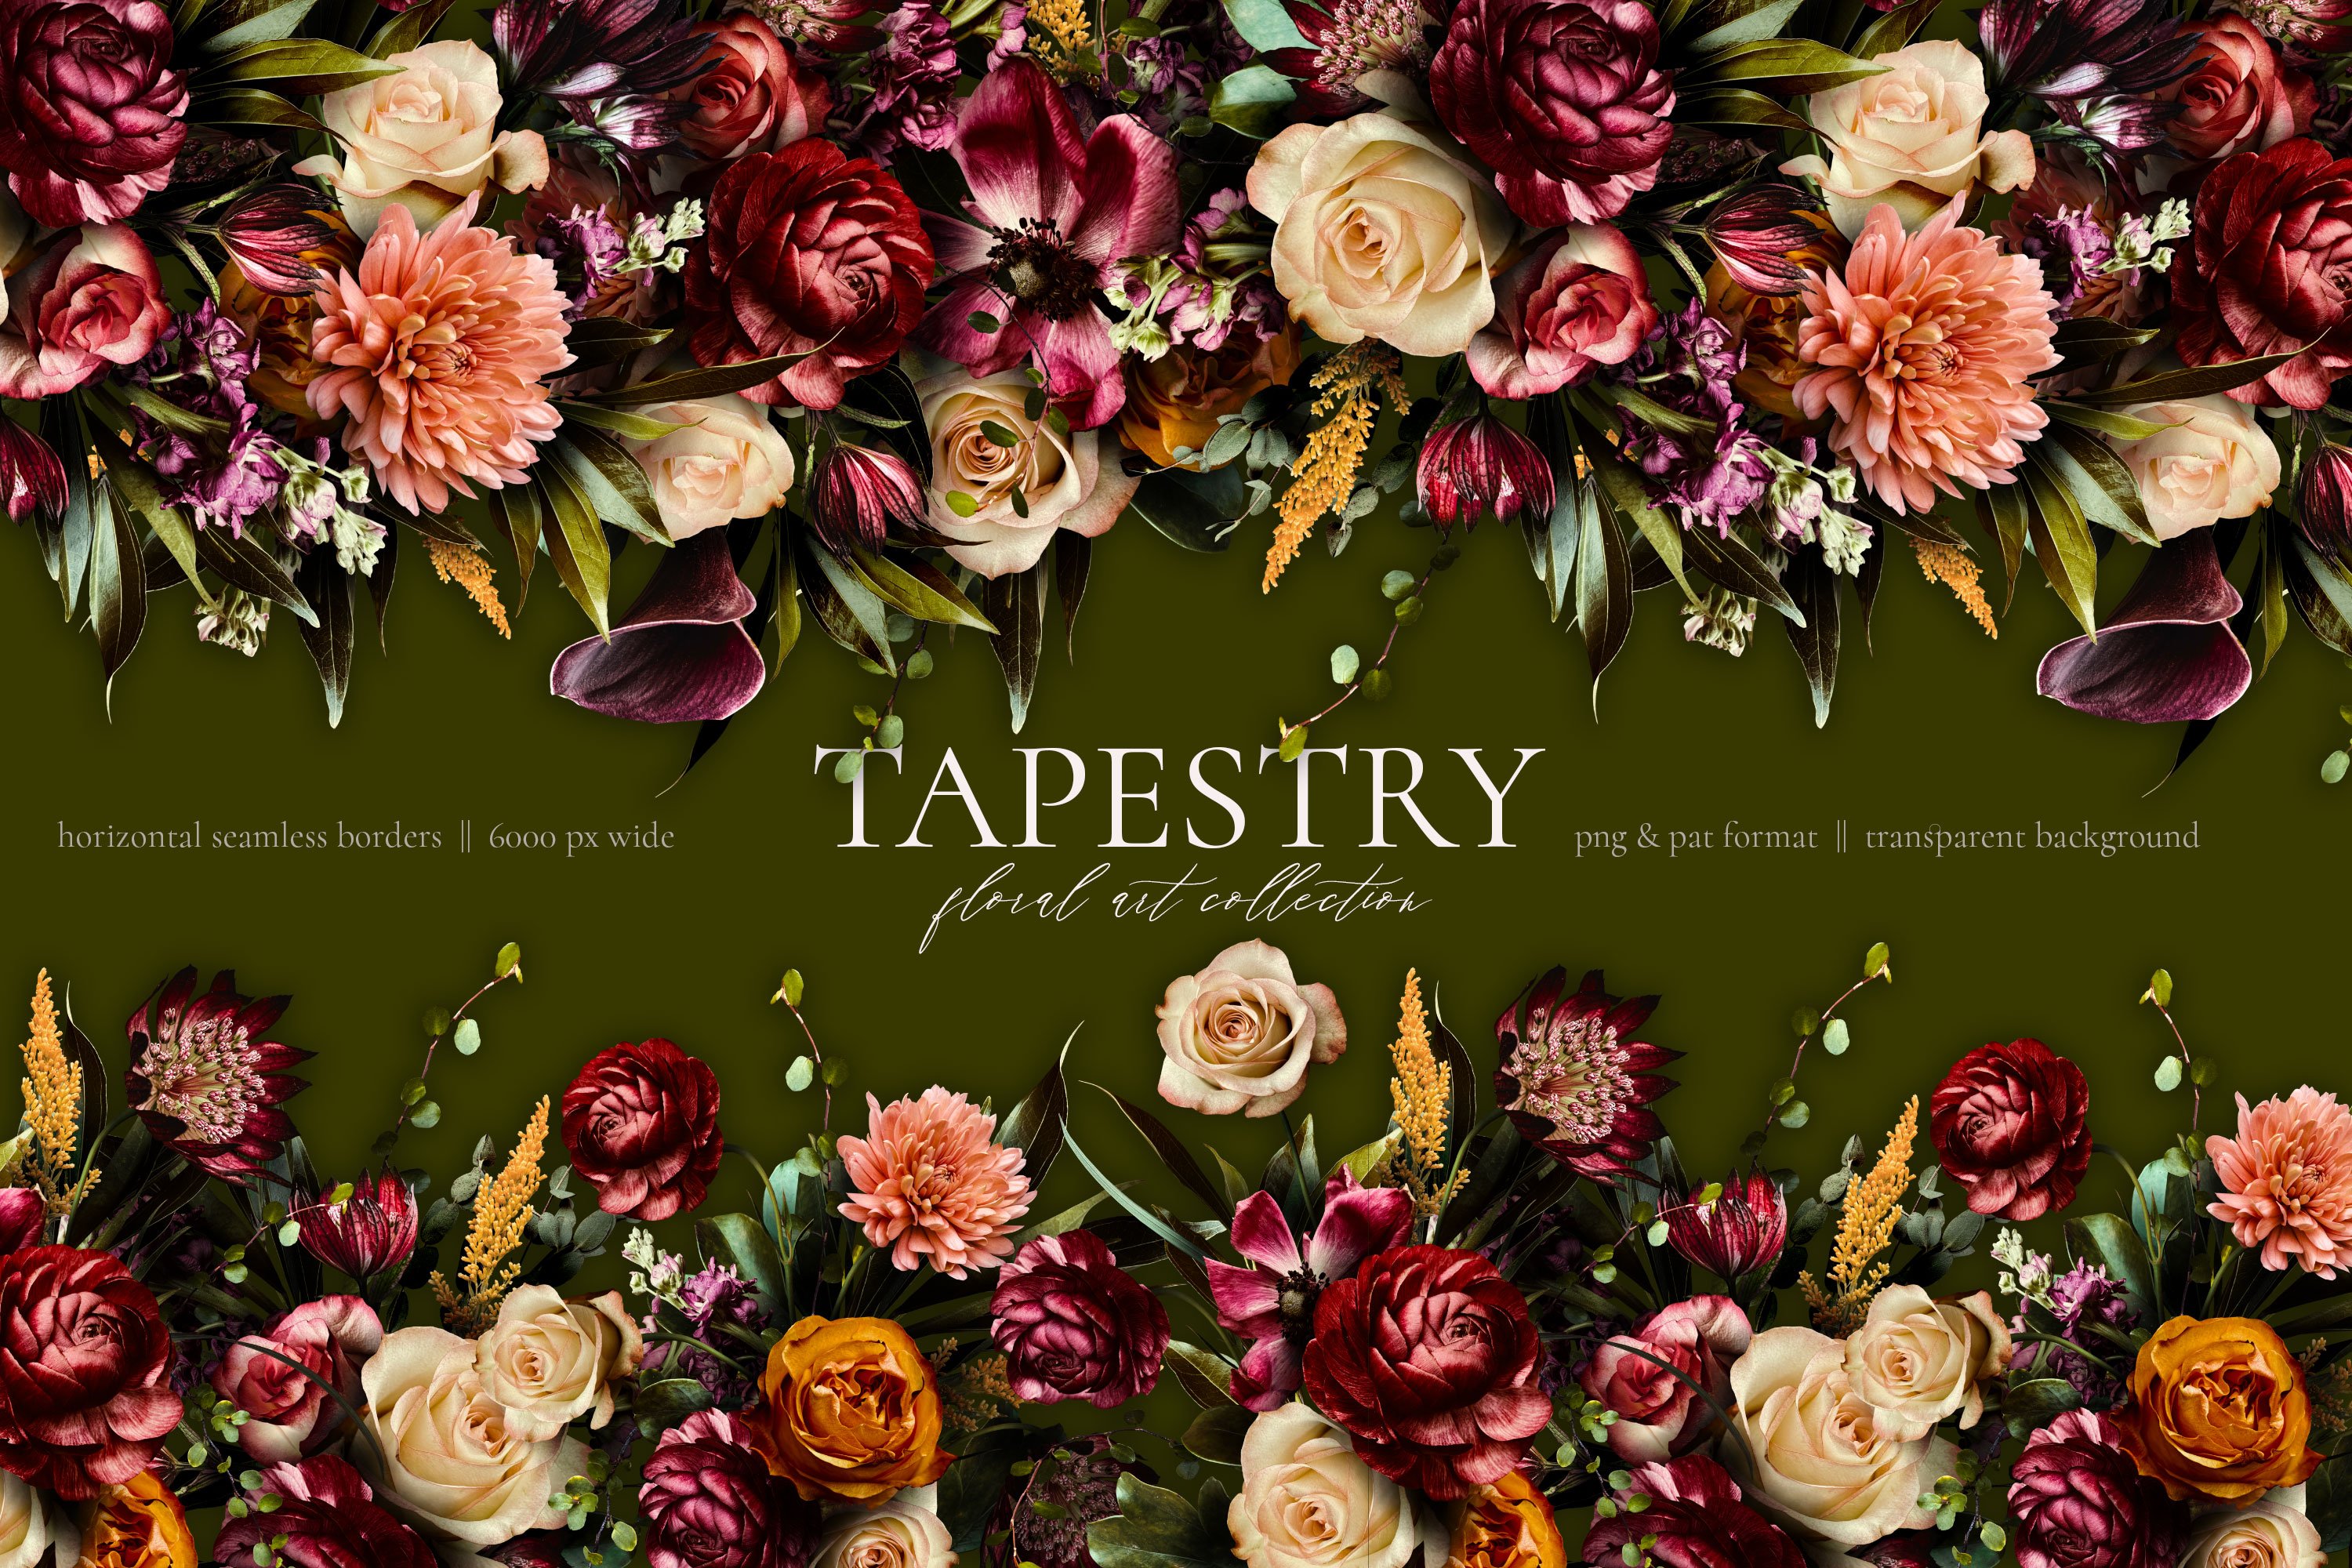 Tapestry Floral Art Collection - Design Cuts